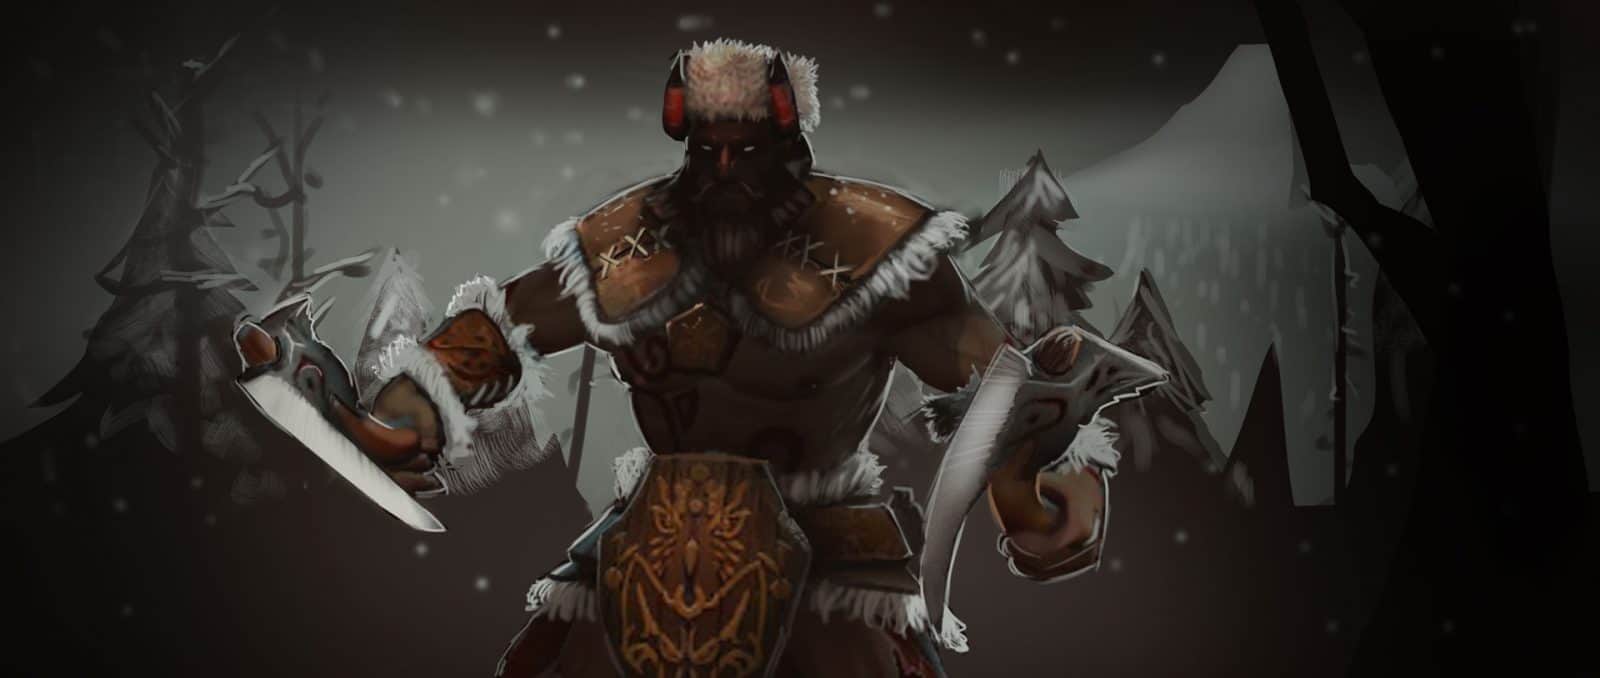 Dota 2 Beastmaster Guide – Tips and How to Play